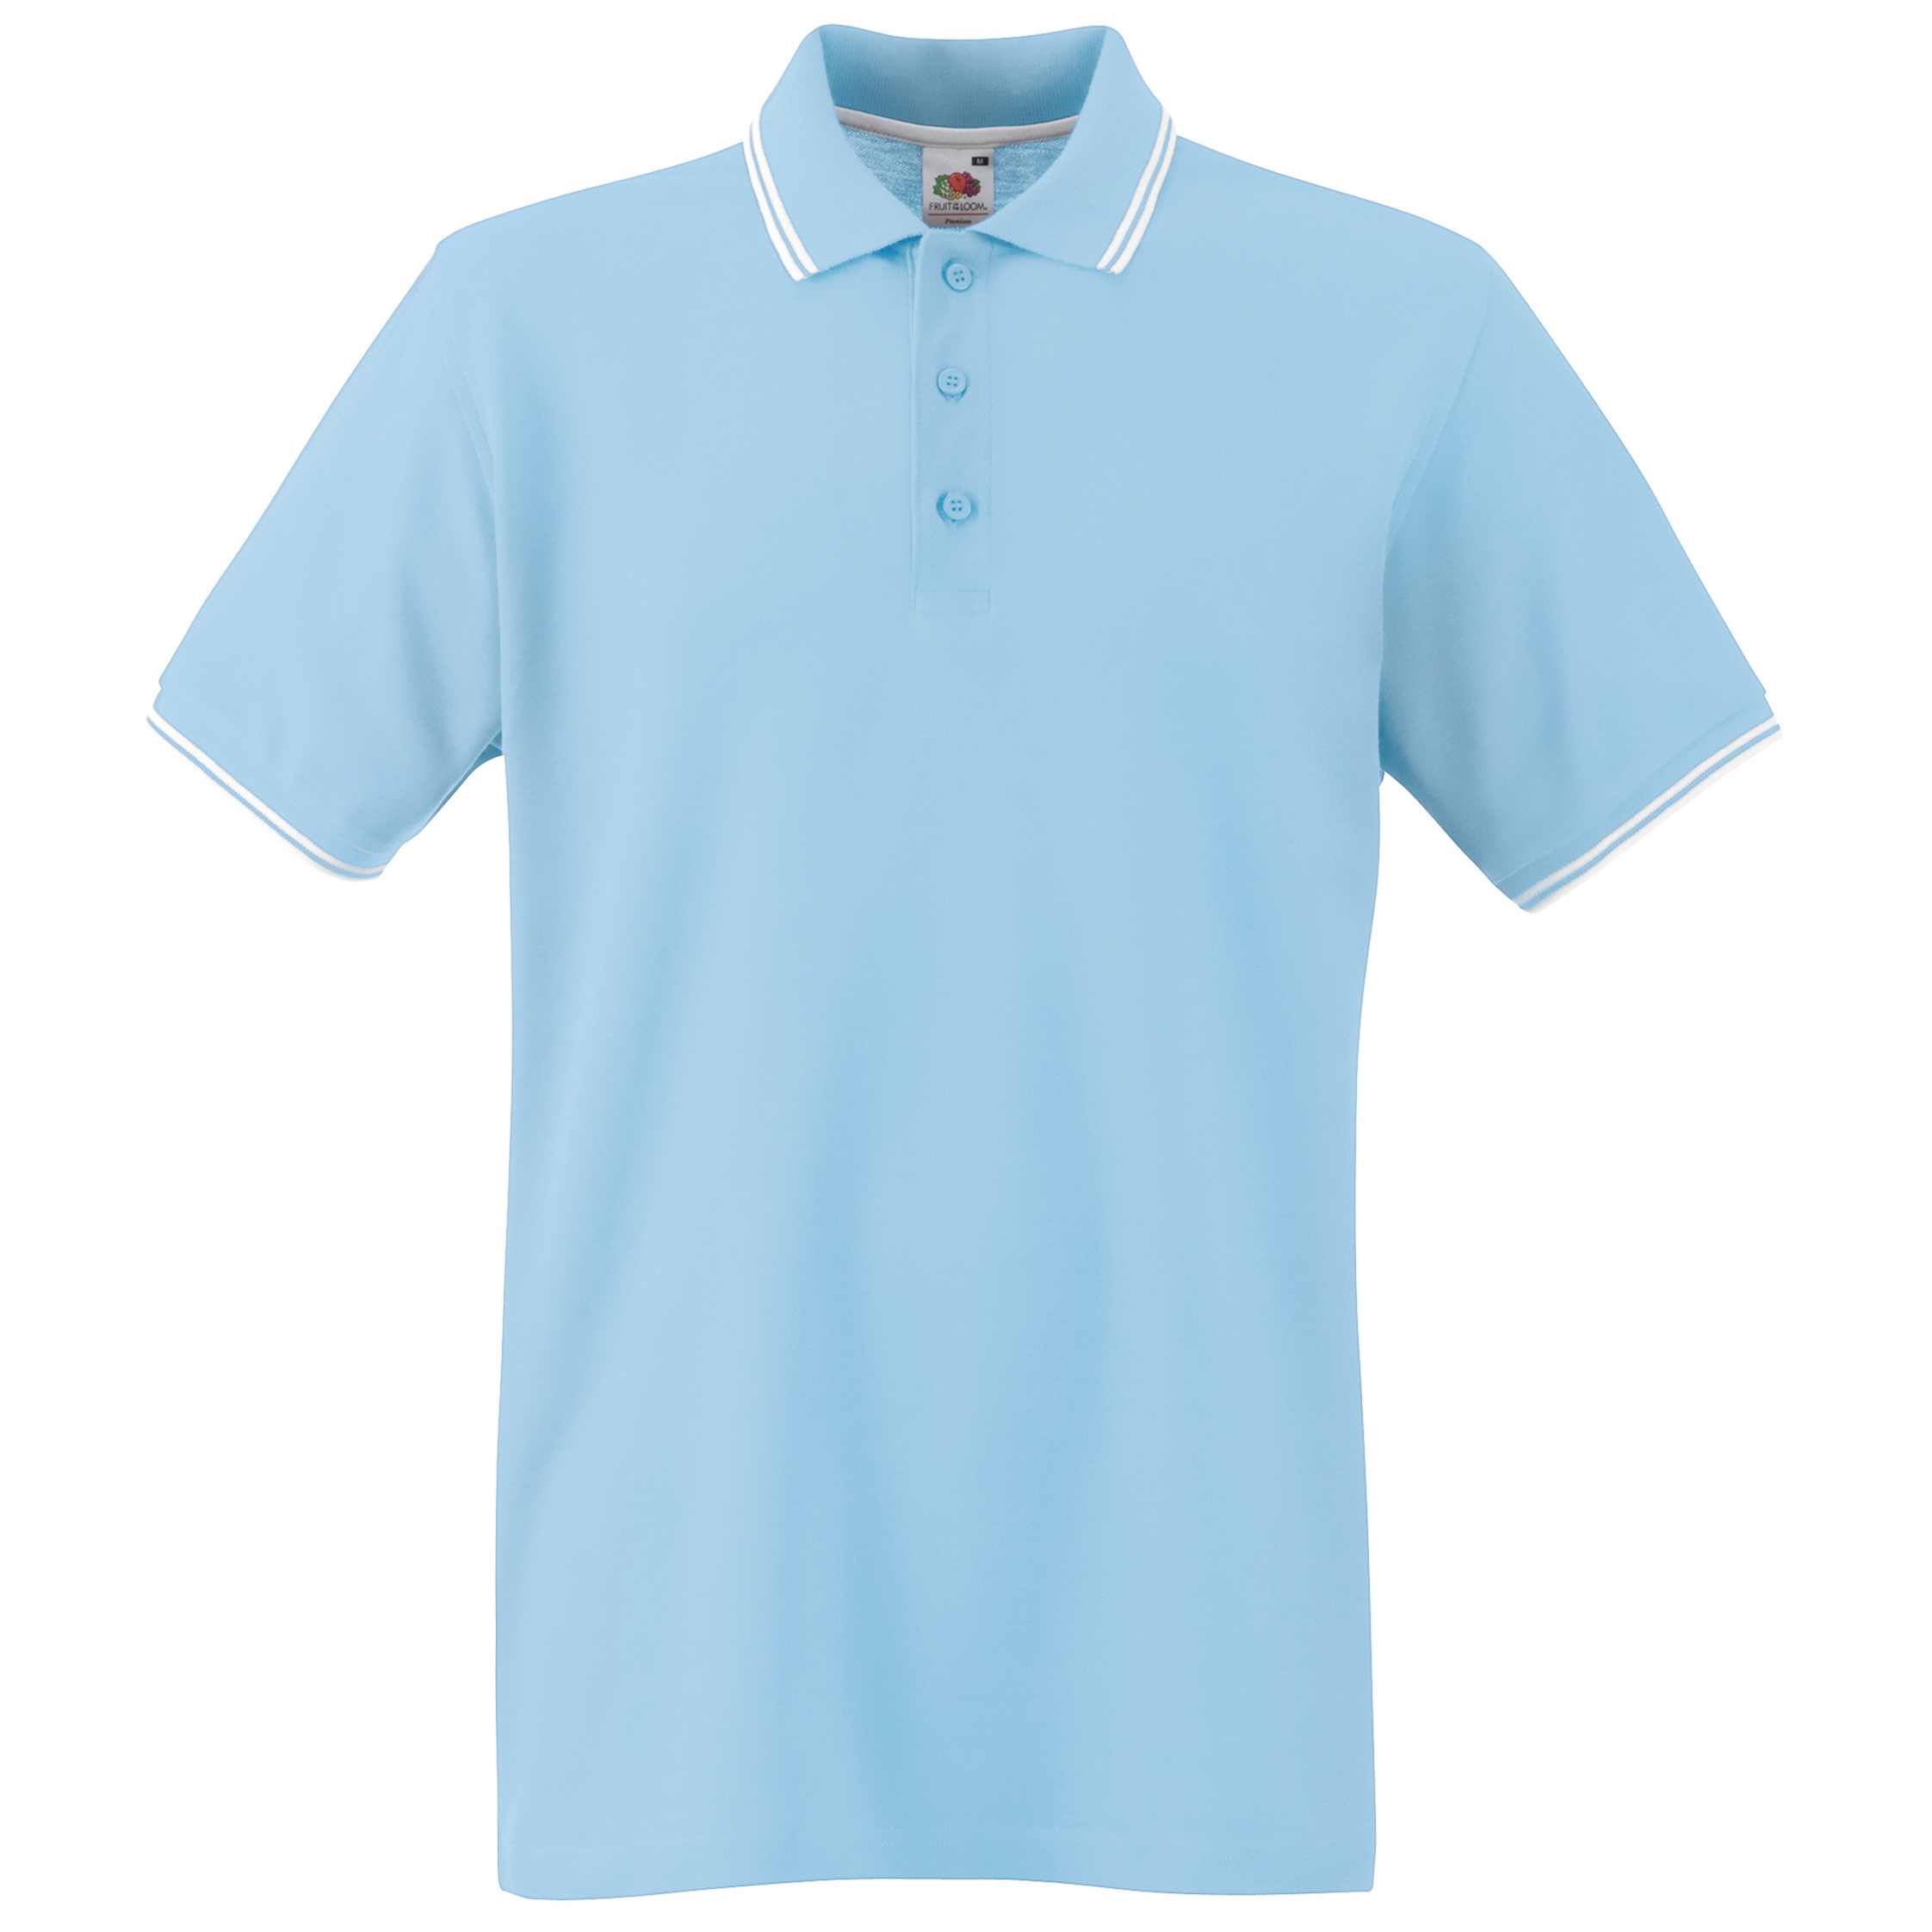 ax-httpswebsystems.s3.amazonaws.comtmp_for_downloadtipped-polo-sky-blue-white.jpg